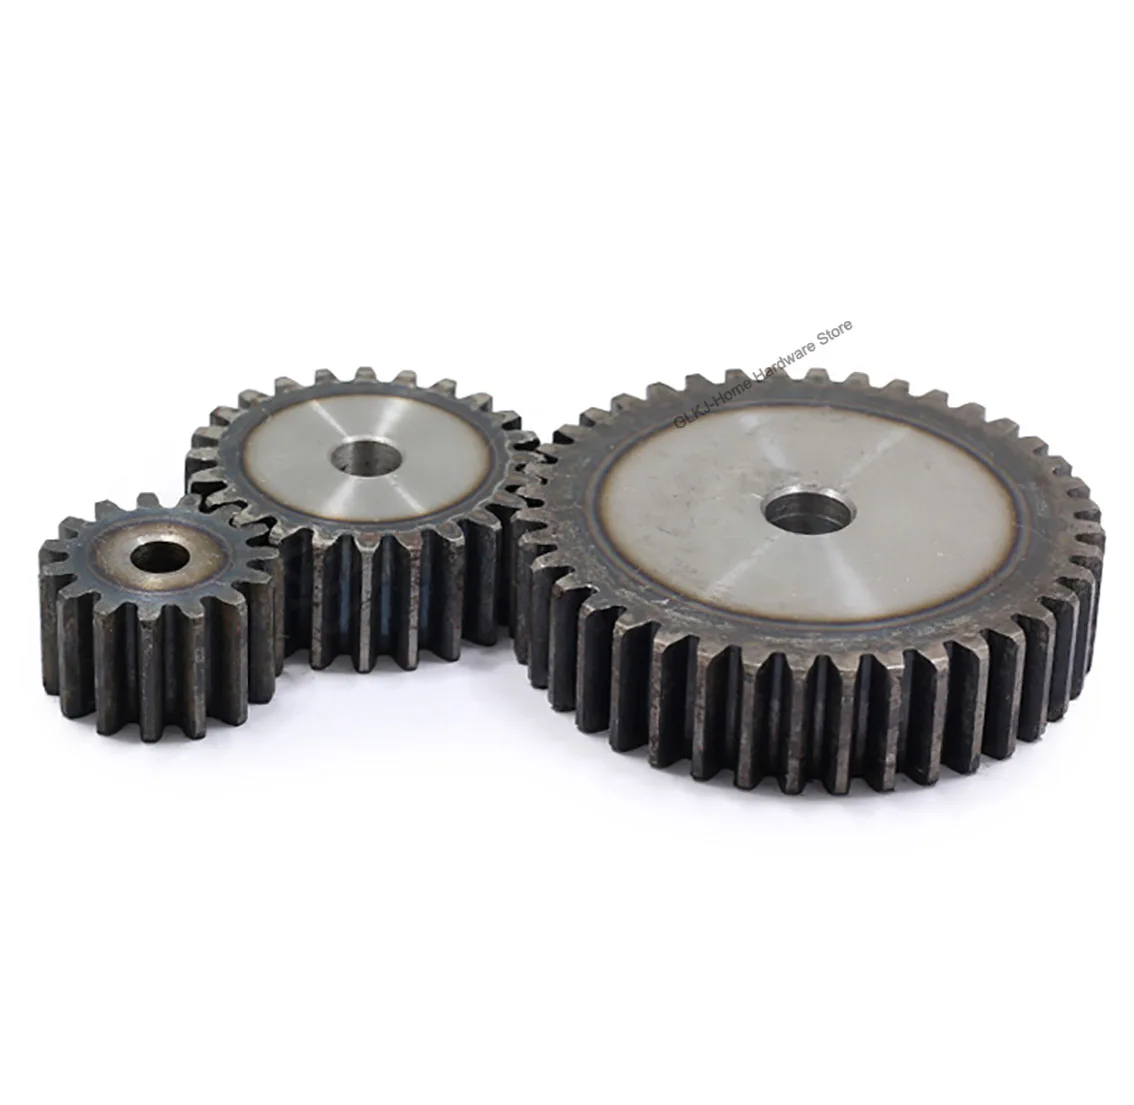 1pcs-module-2-spur-gear-58-61-tooth-thick-20mm-45-carbon-steel-metal-transmission-pinion-gear-process-hole-12-15-16mm